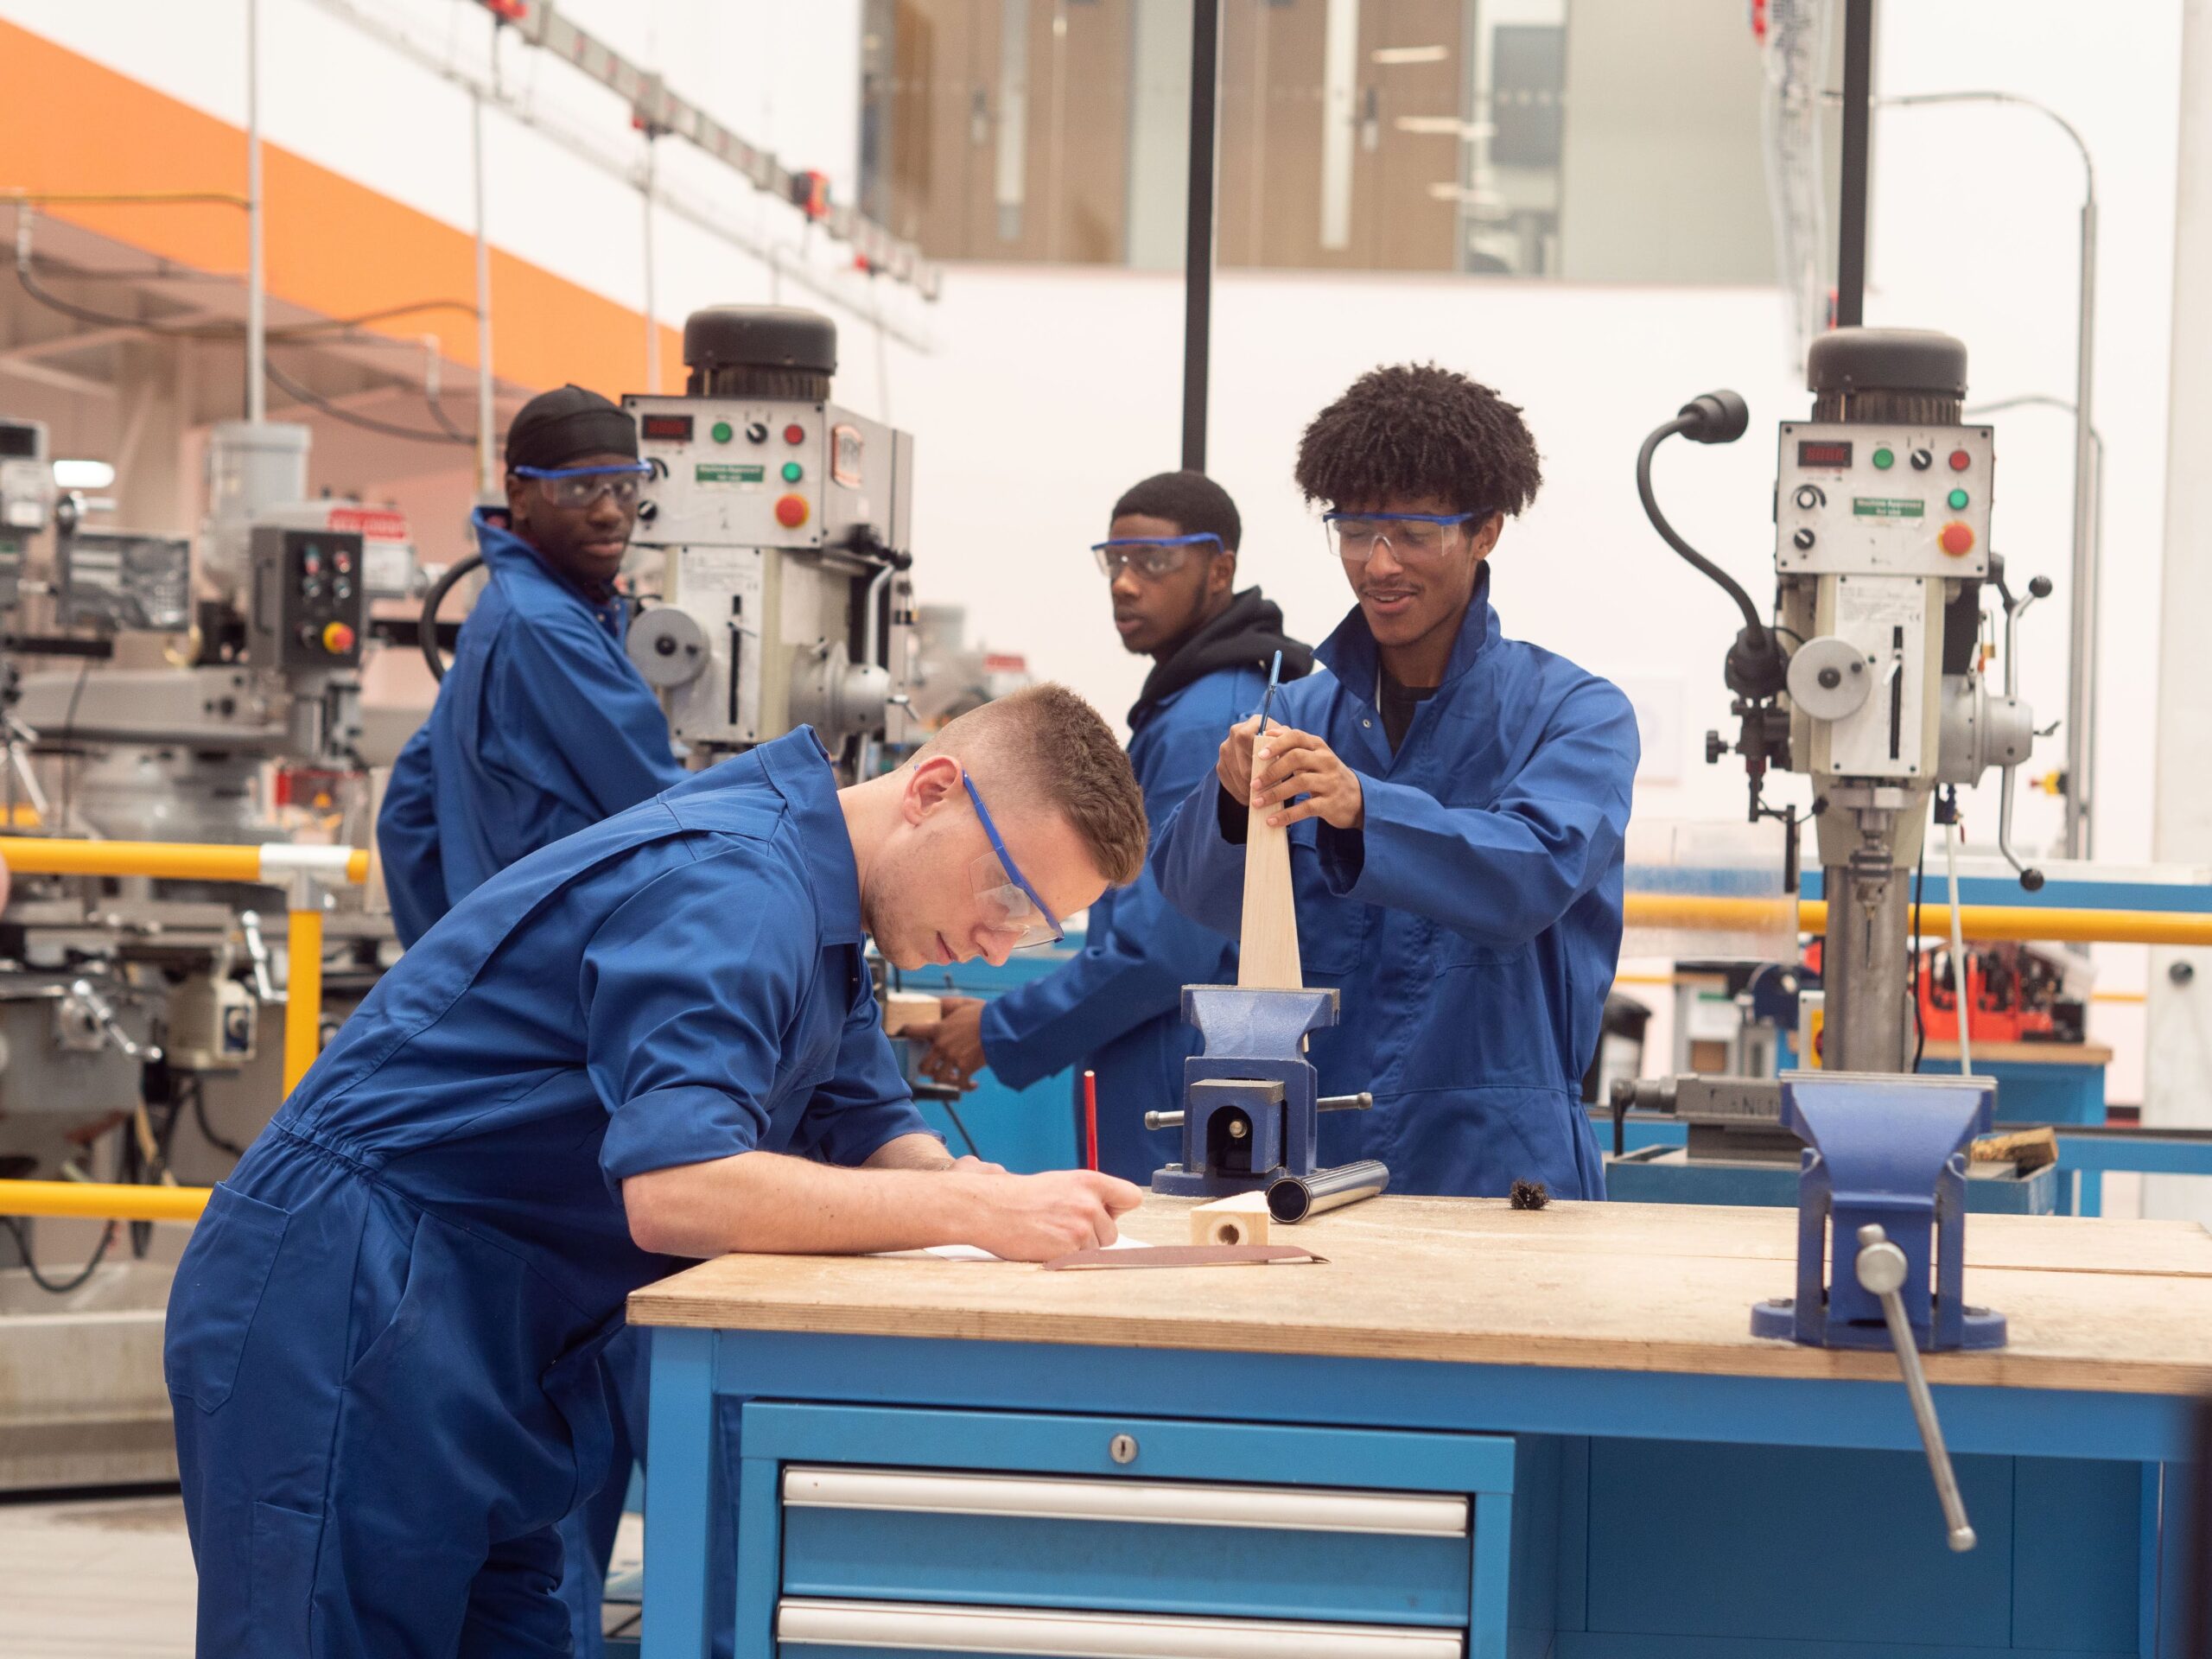 POST-EXAM RESULTS SURGE IN APPRENTICESHIP ENQUIRIES, SAYS MAKE UK @MAKEUK_